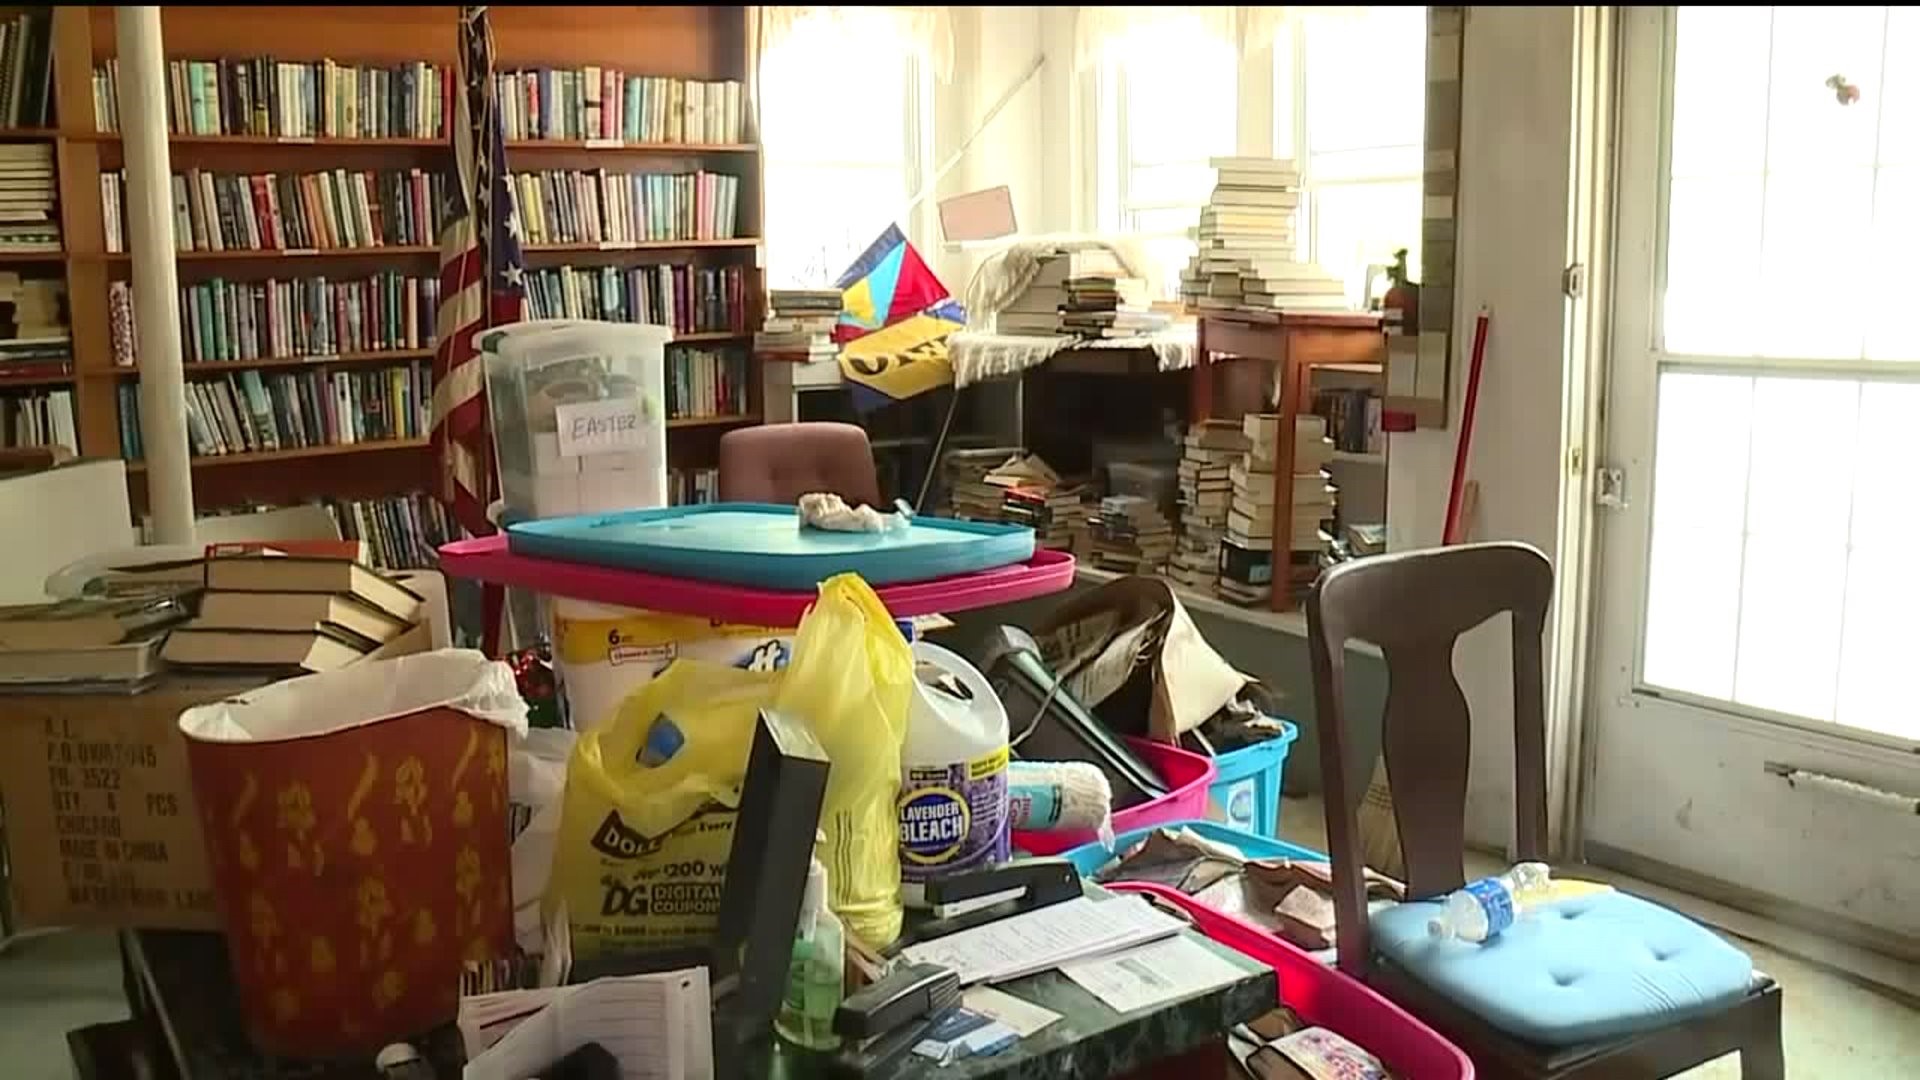 Flood Damage Causes Library to Close